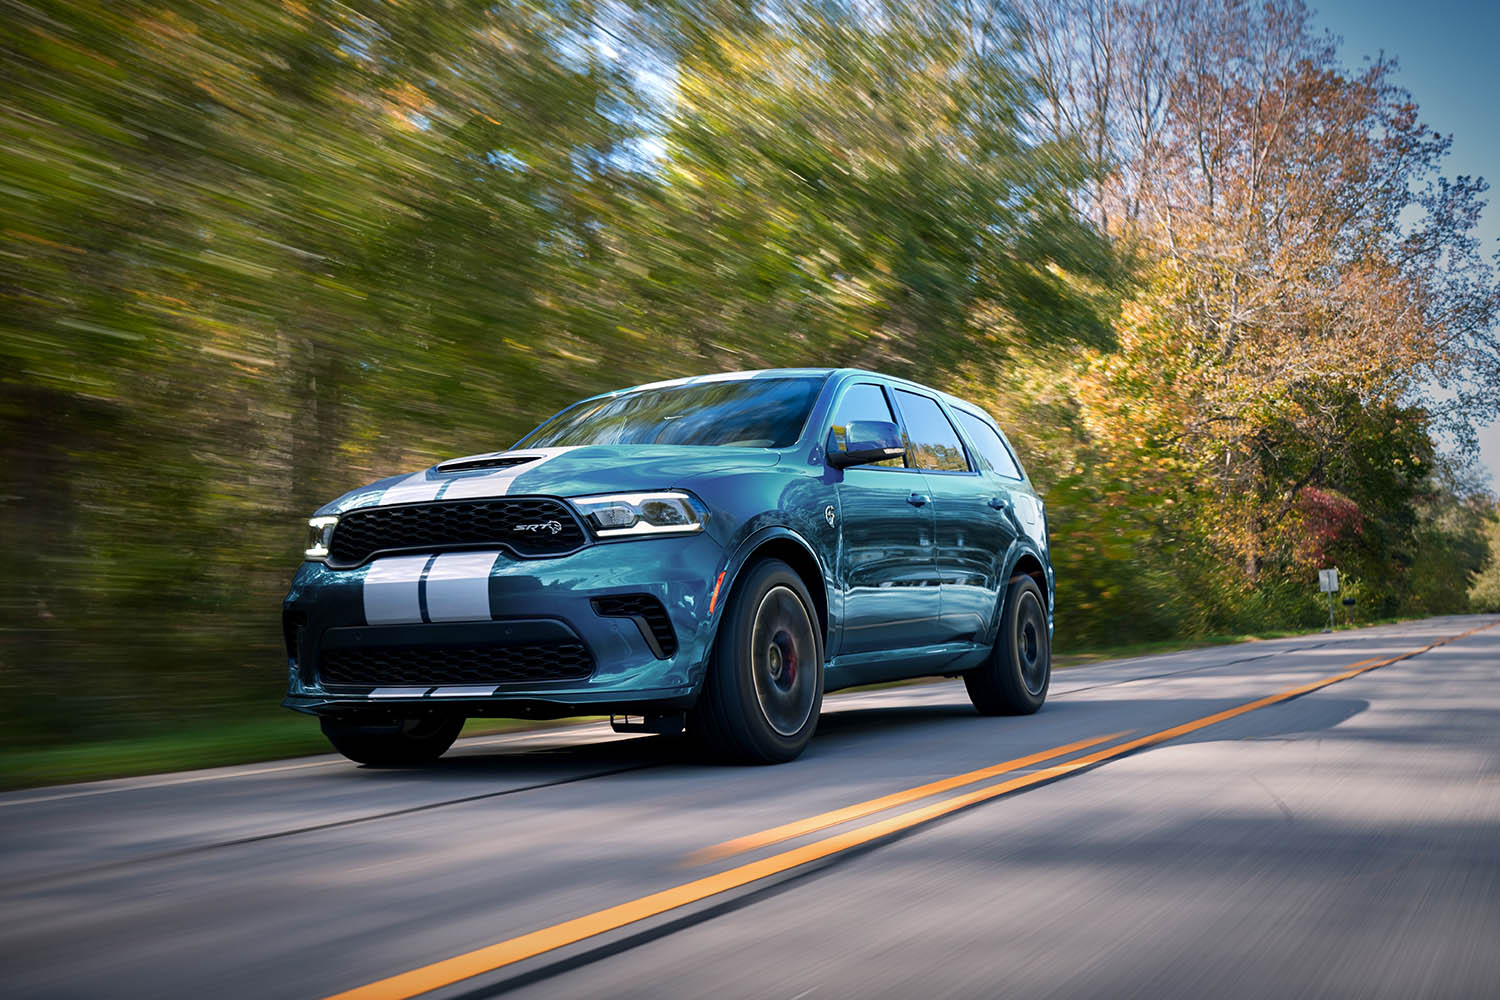 2023 Dodge Durango SRT Hellcat in blue with white stripes driving down a tree-lined, two lane road